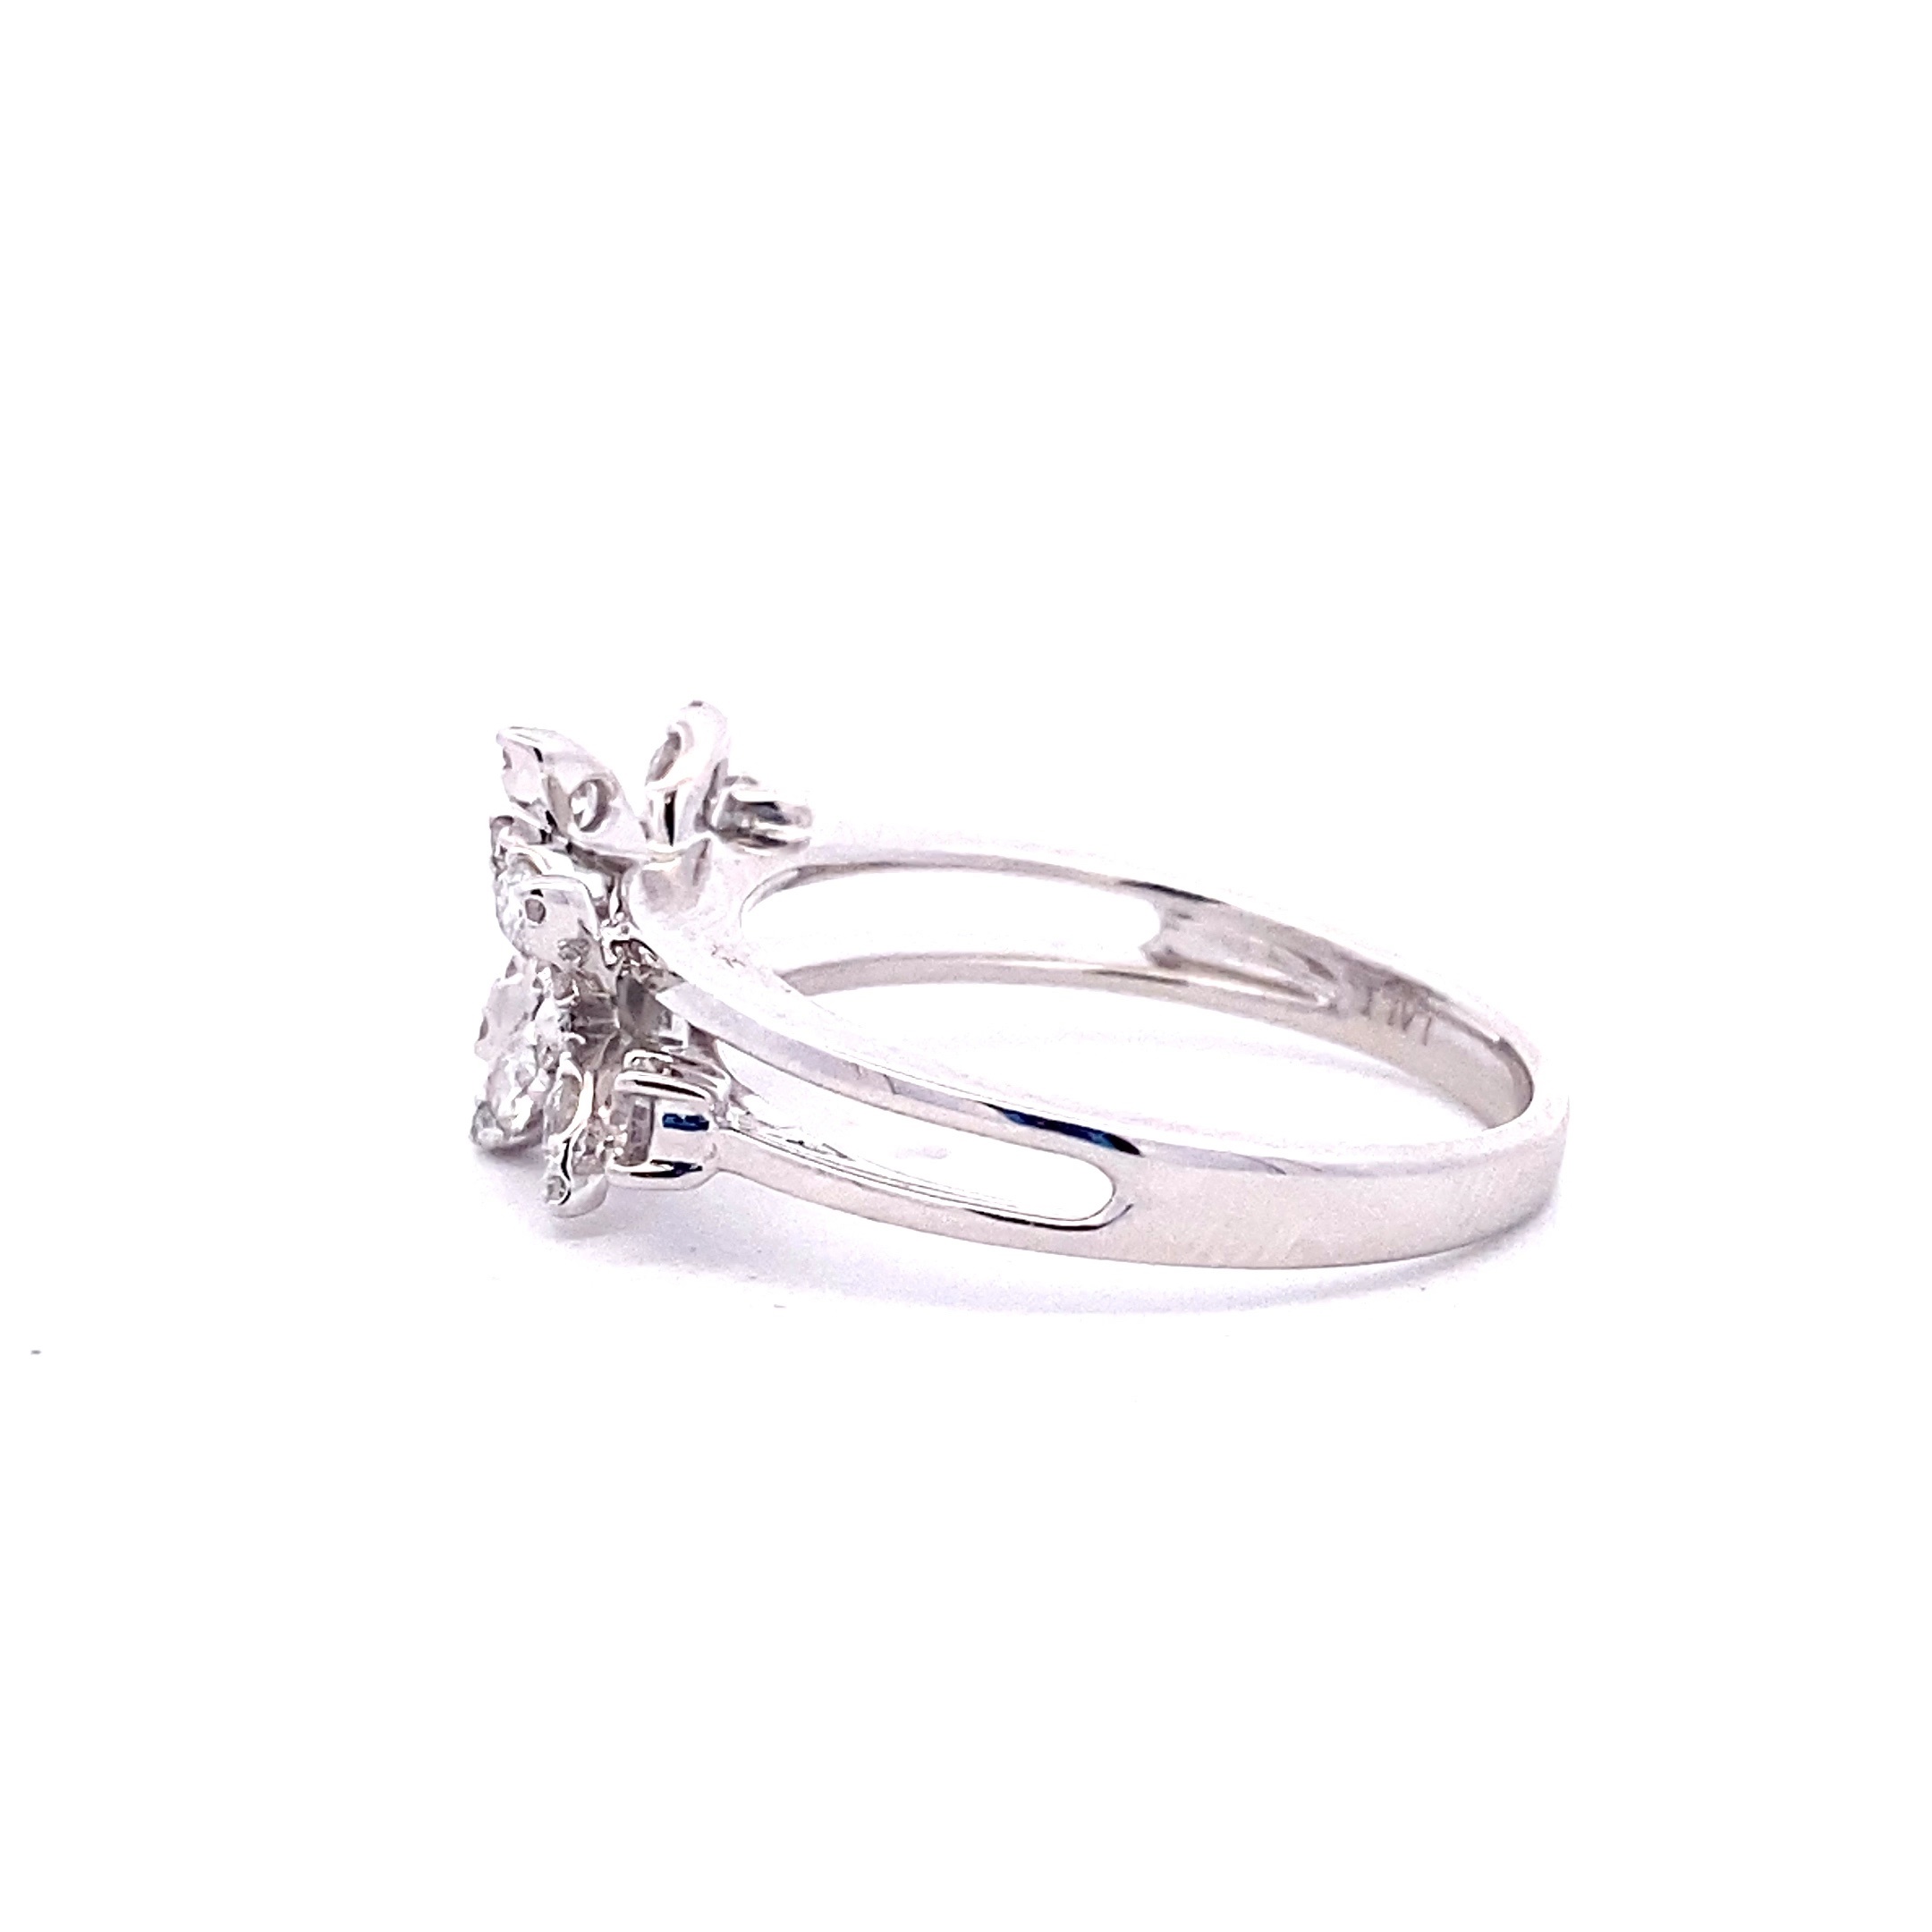 Double Flower Diamond Ring by Lali